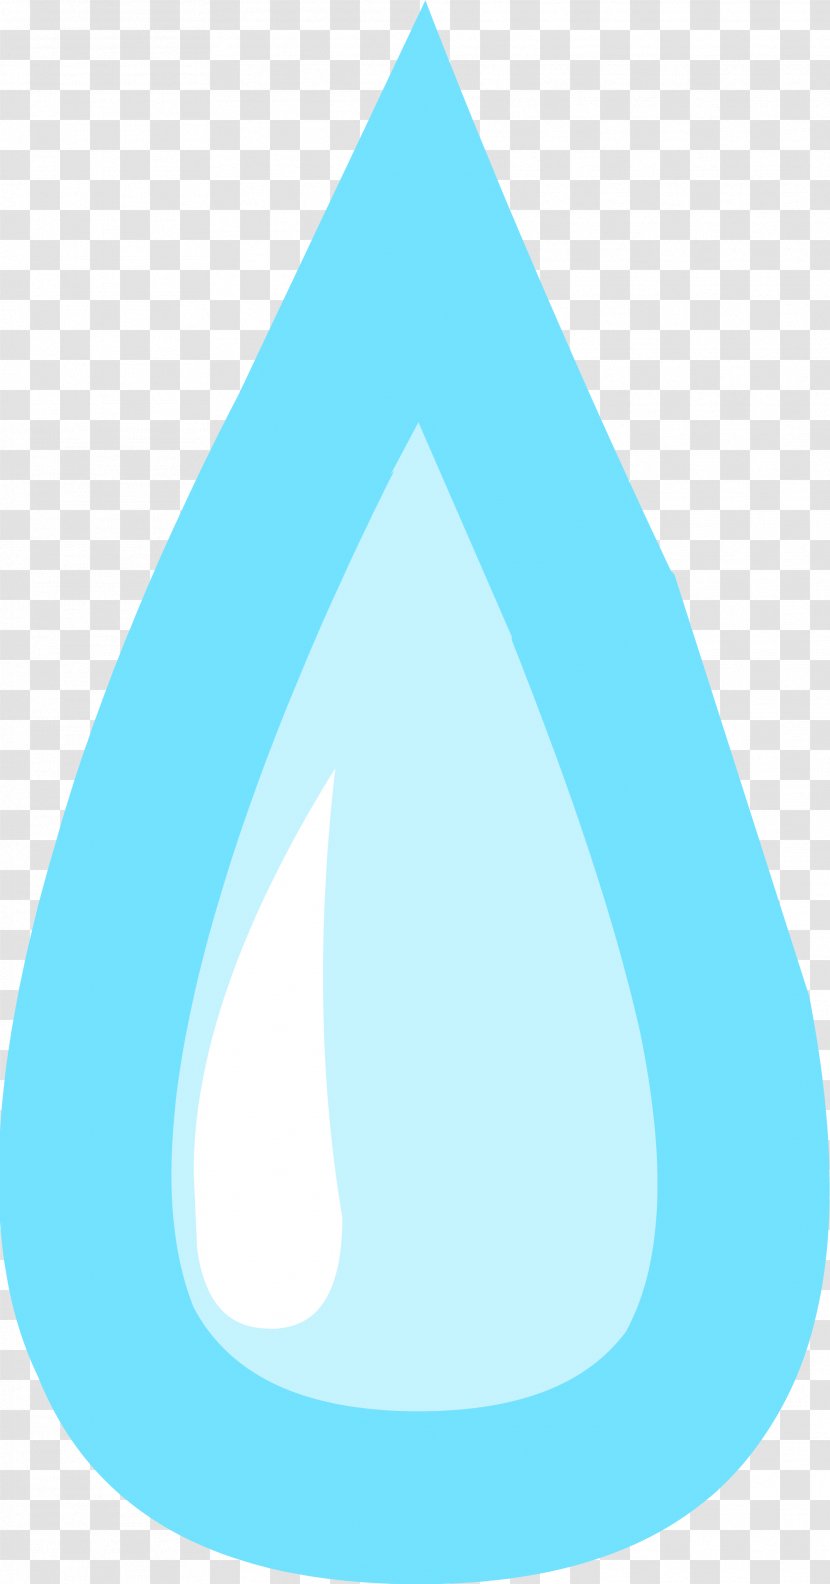 Triangle Teal Turquoise Circle - Azure - Tears Transparent PNG